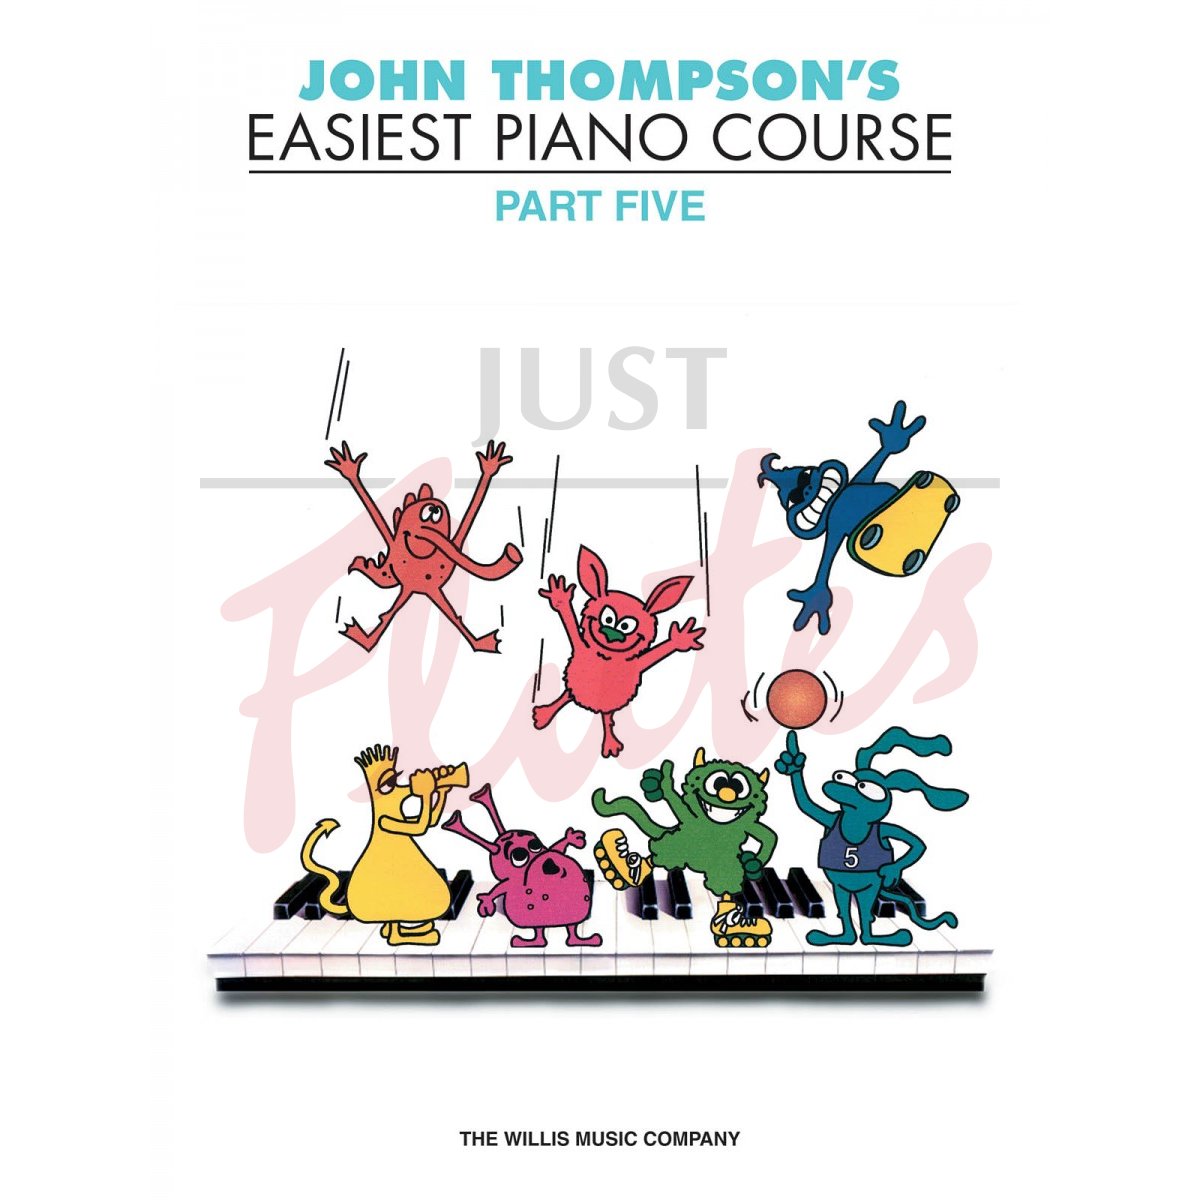 John Thompson's Easiest Piano Course Part Five